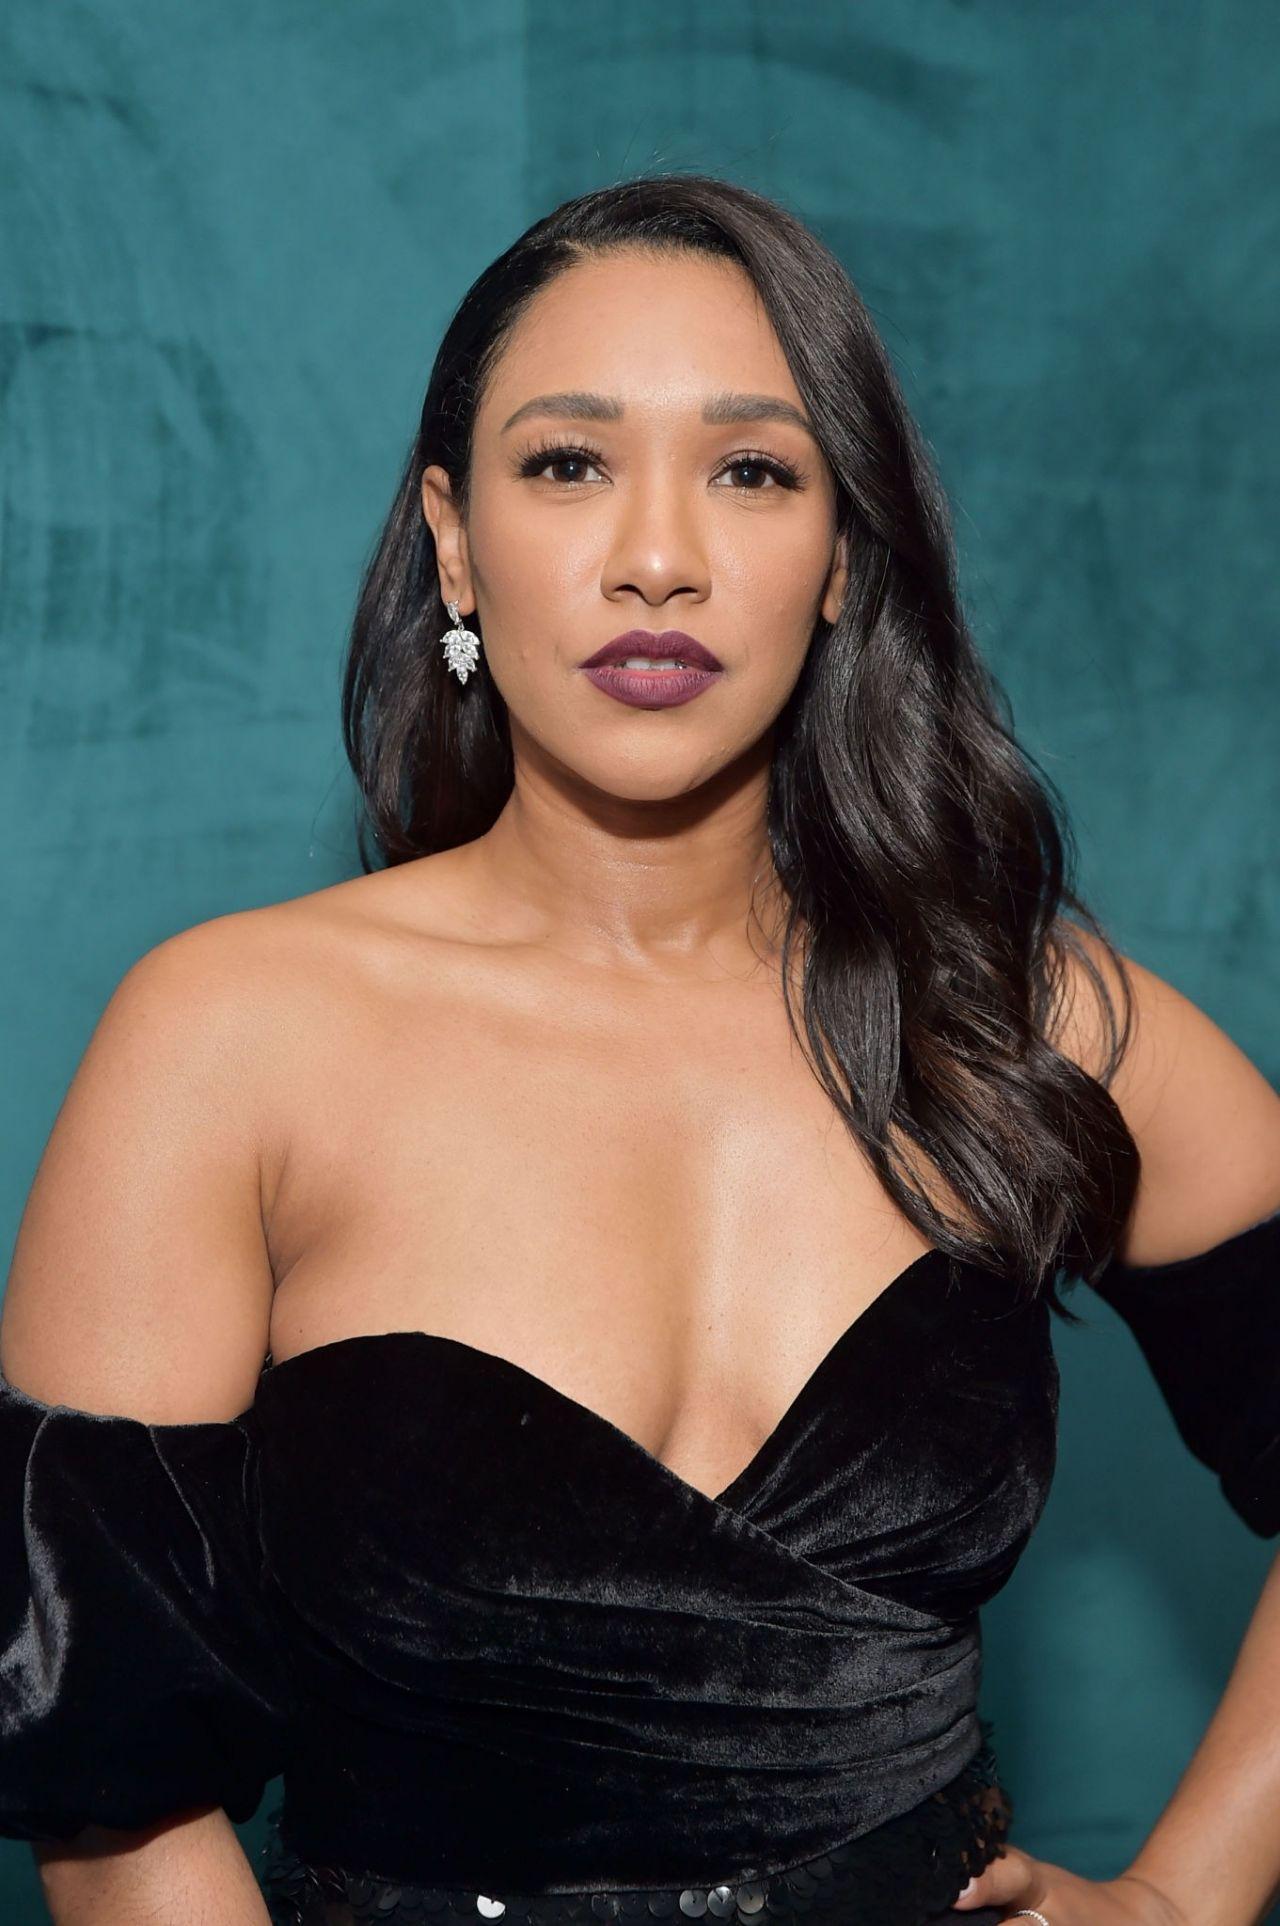 70+ Hot Pictures Of Candice Patton Who Plays Iris West In Flash TV Series 403